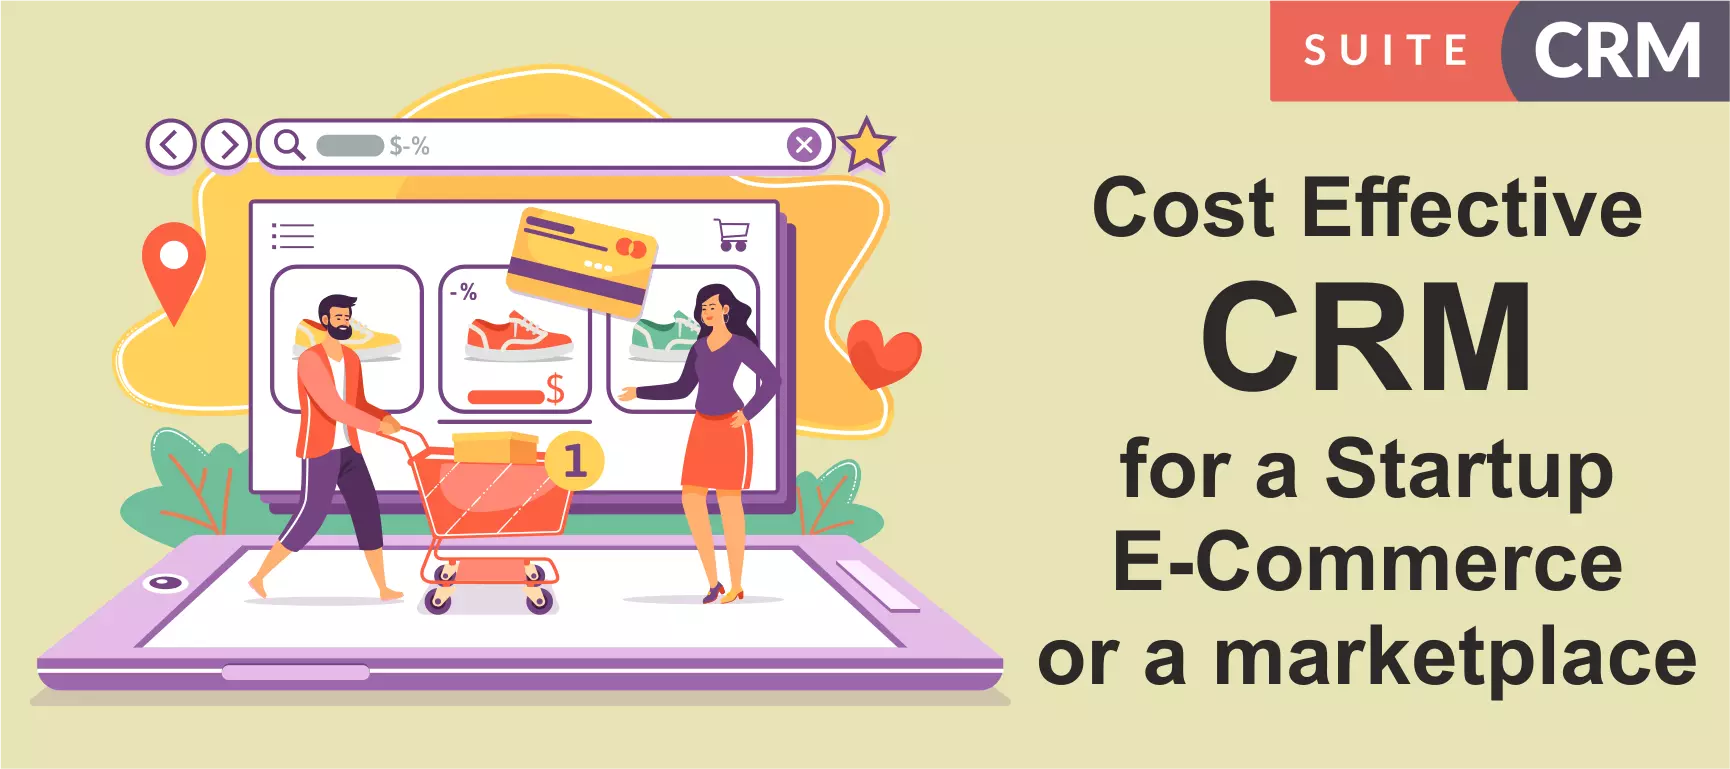 costeffective-crm-for-a-startup-ecommerce-or-a-marketplace